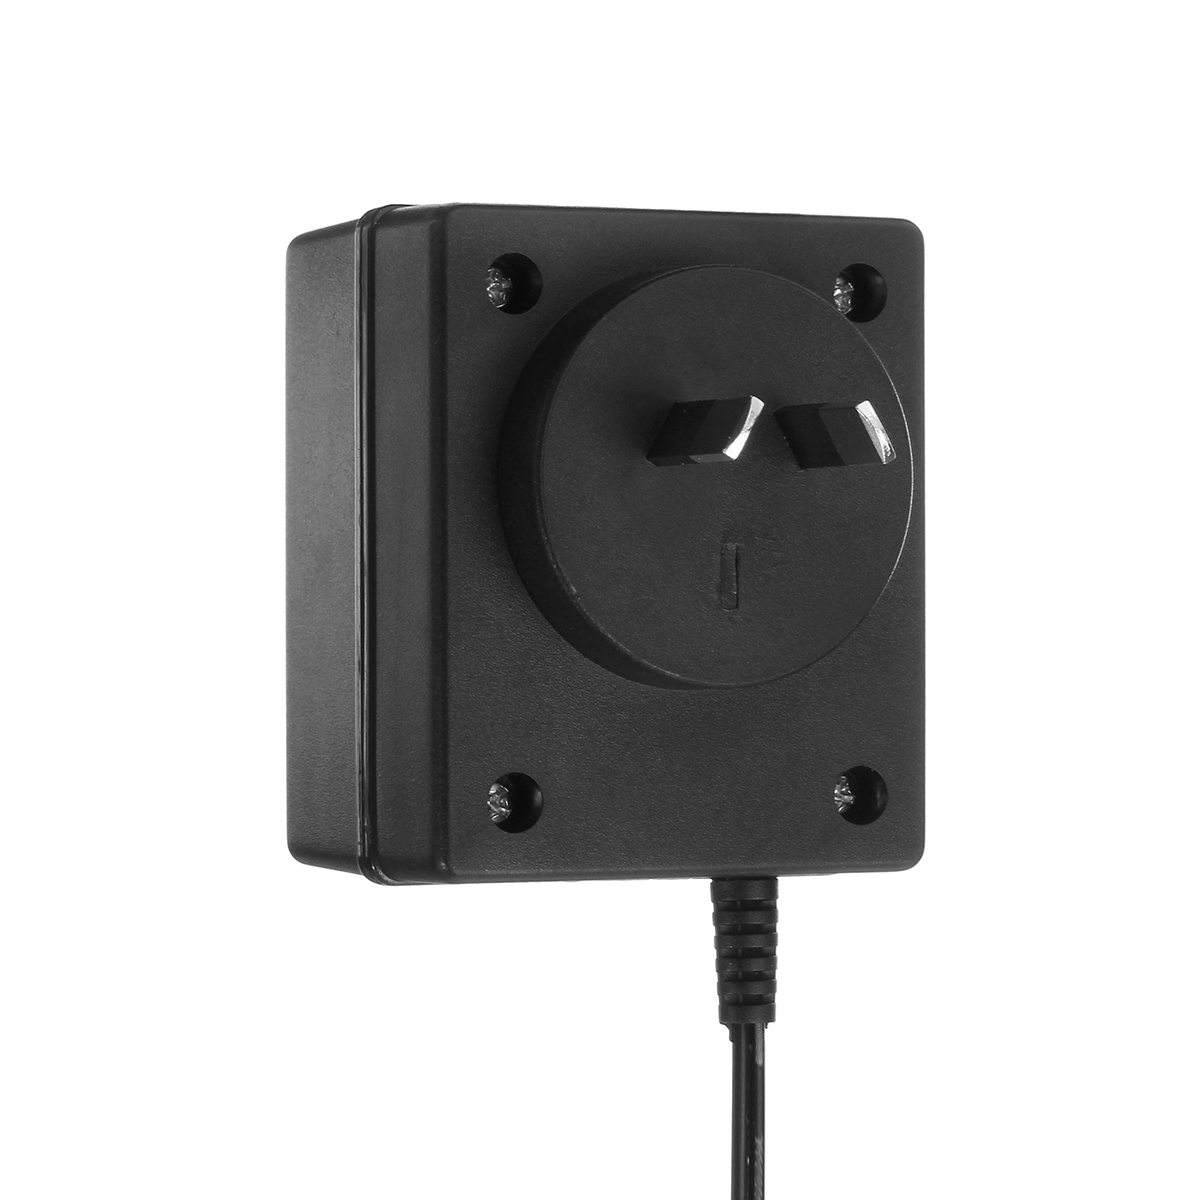 7m-Cable-AU-Plug-Adapter-for-Rring-Video-Doorbell-230V-to-18V-500ma-1587262-5